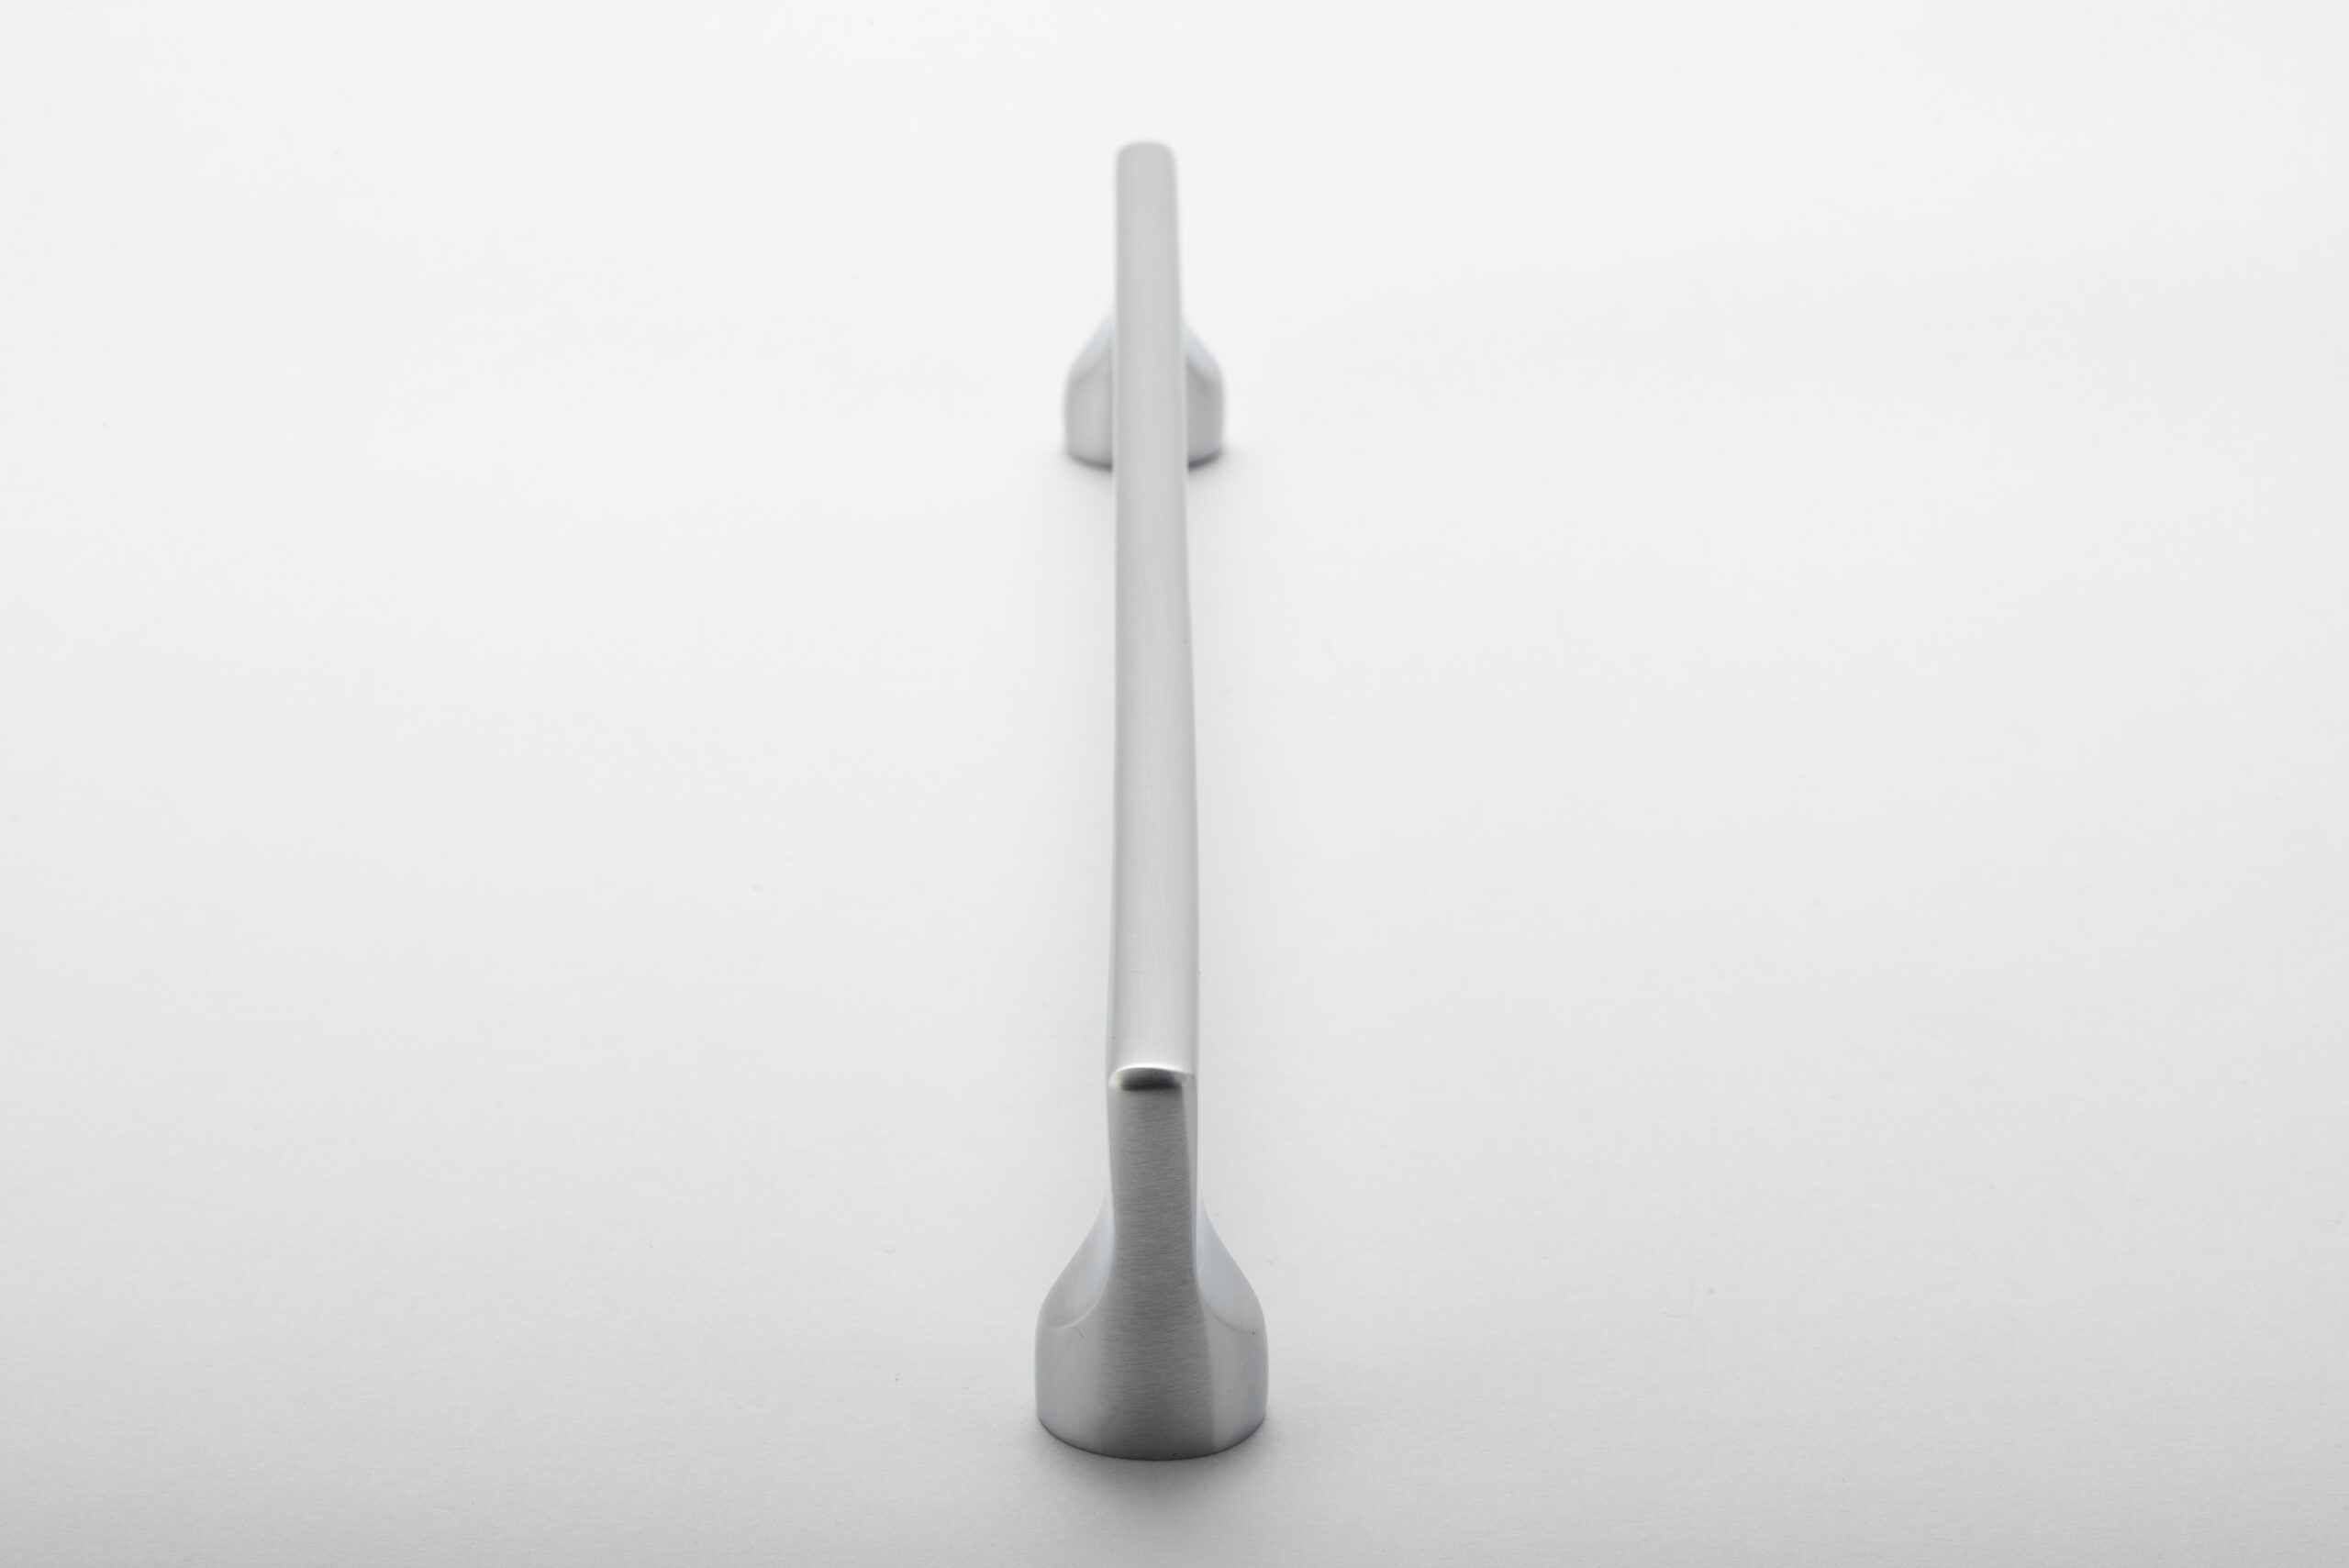 20895 - Baltimore Cabinet Pull - CTC160mm - Brushed Chrome